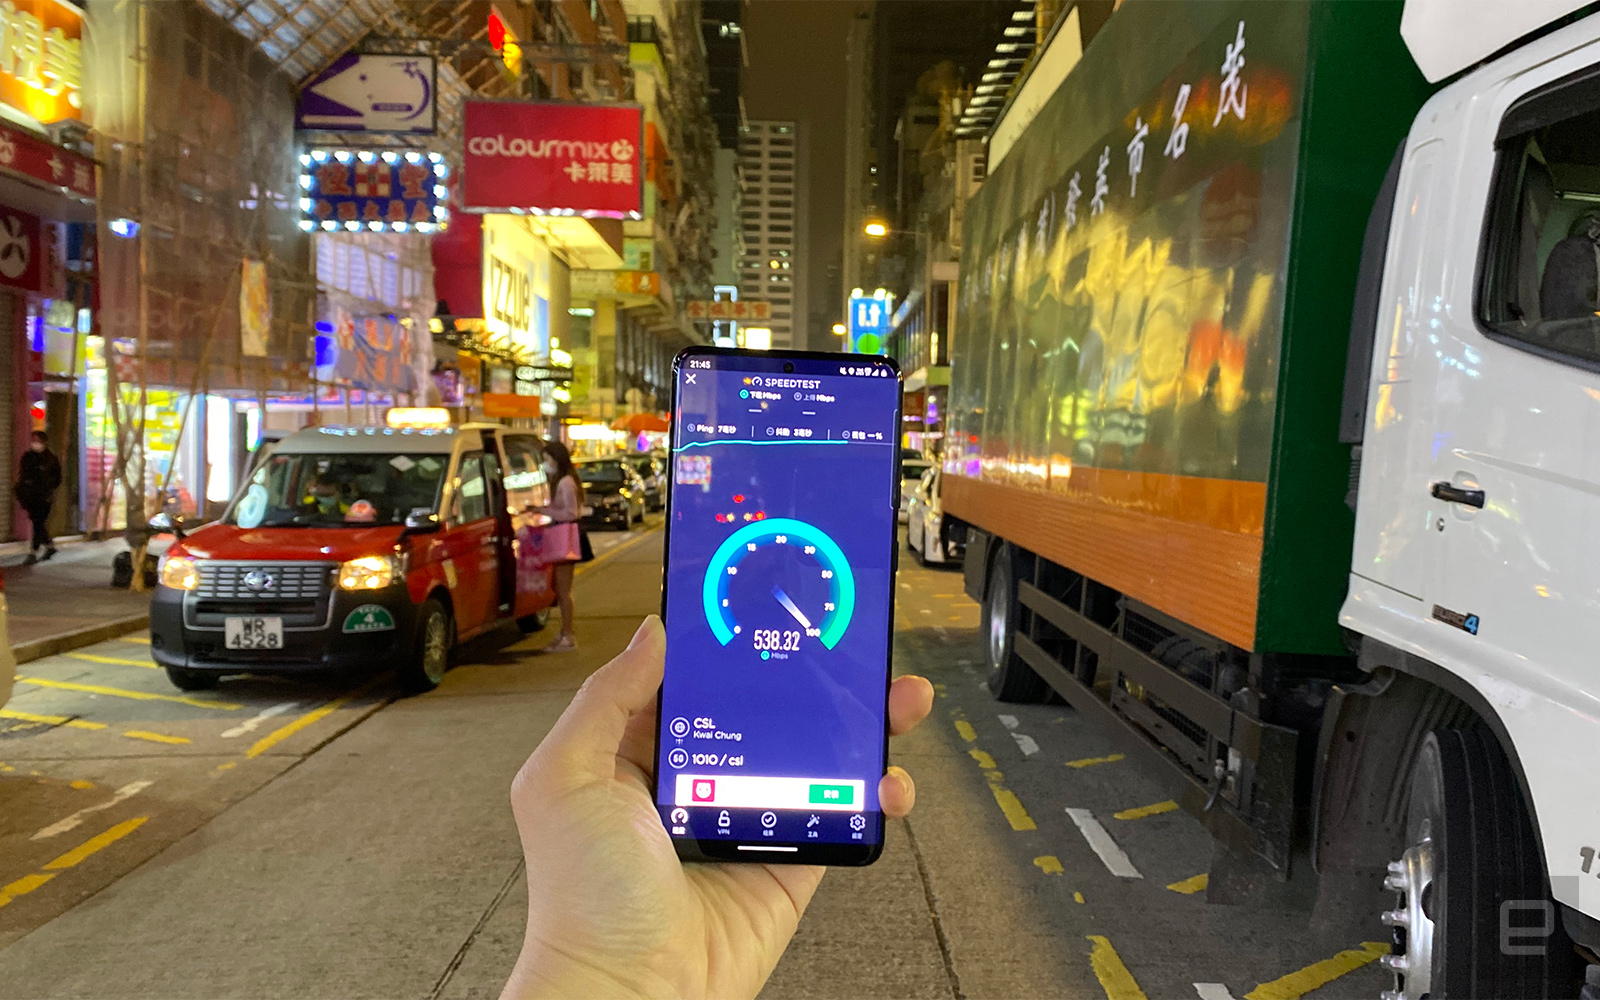 HK 5G launched first day